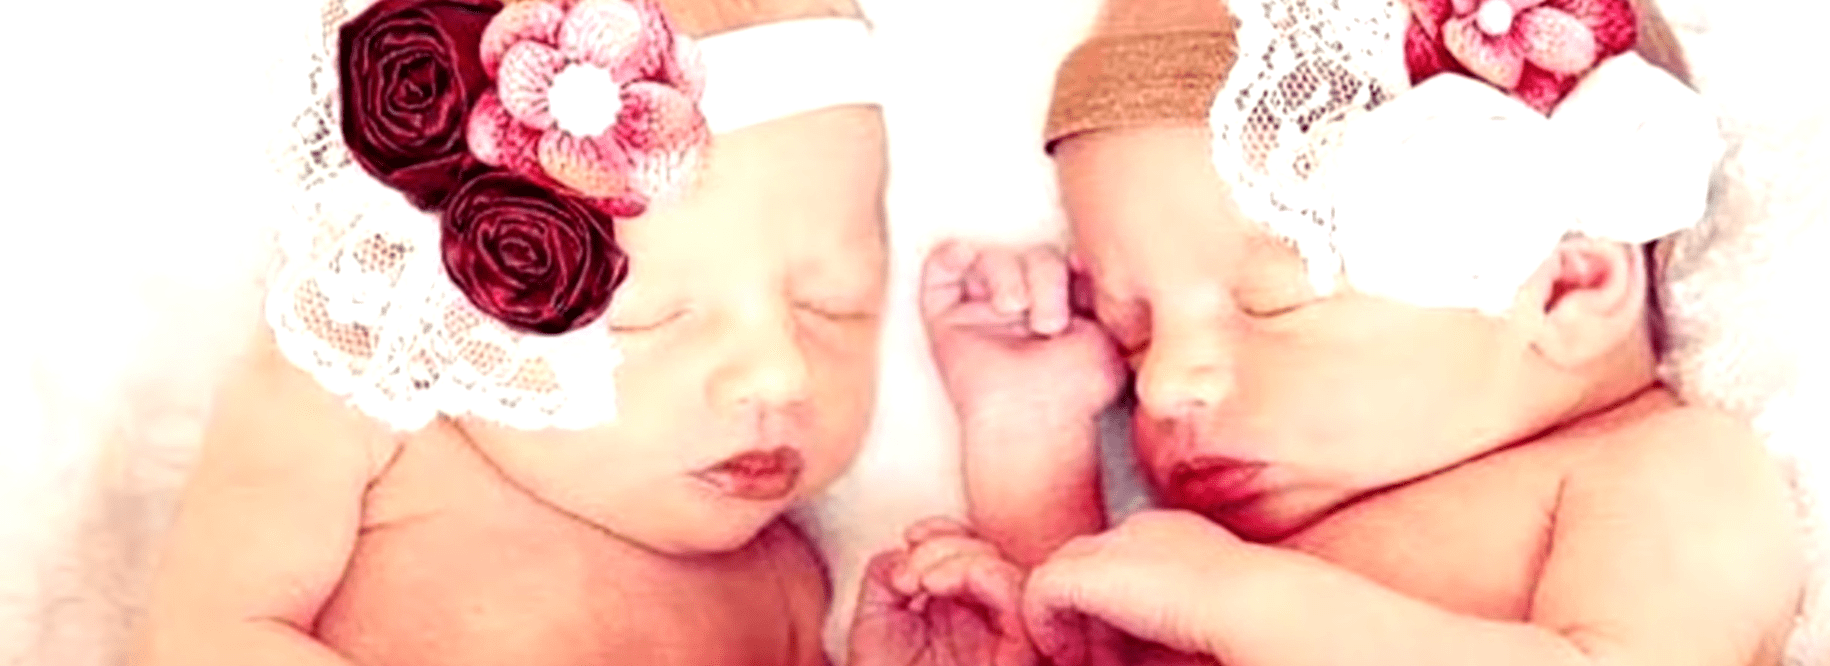 A baby picture of April and Nathan Willis’ twin daughters Sophia and Vivienne. | Source: youtube.com/Dr. Phil